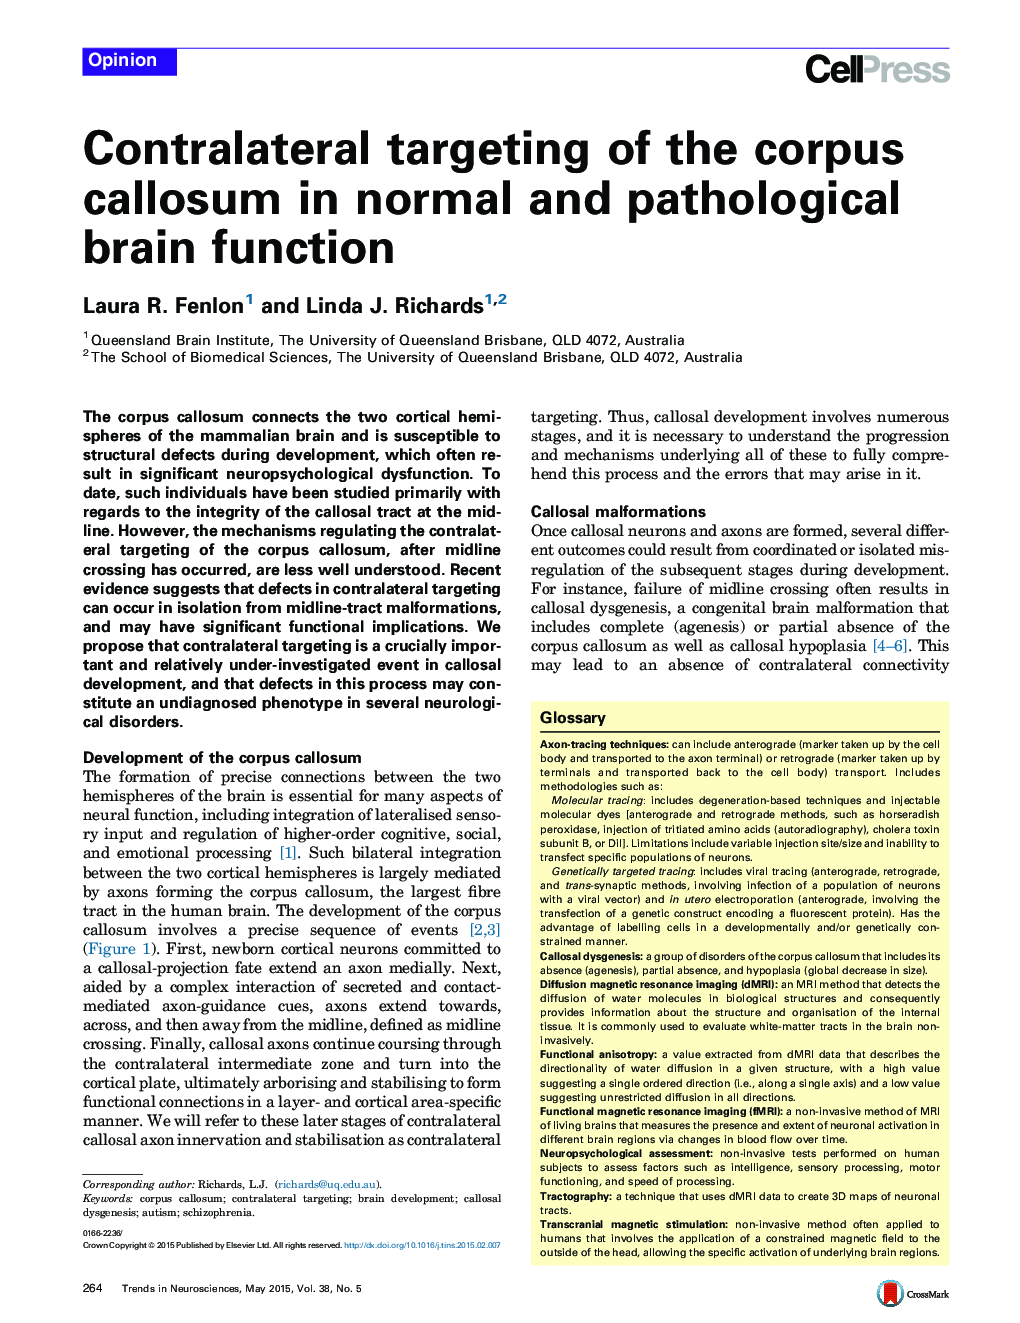 Contralateral targeting of the corpus callosum in normal and pathological brain function